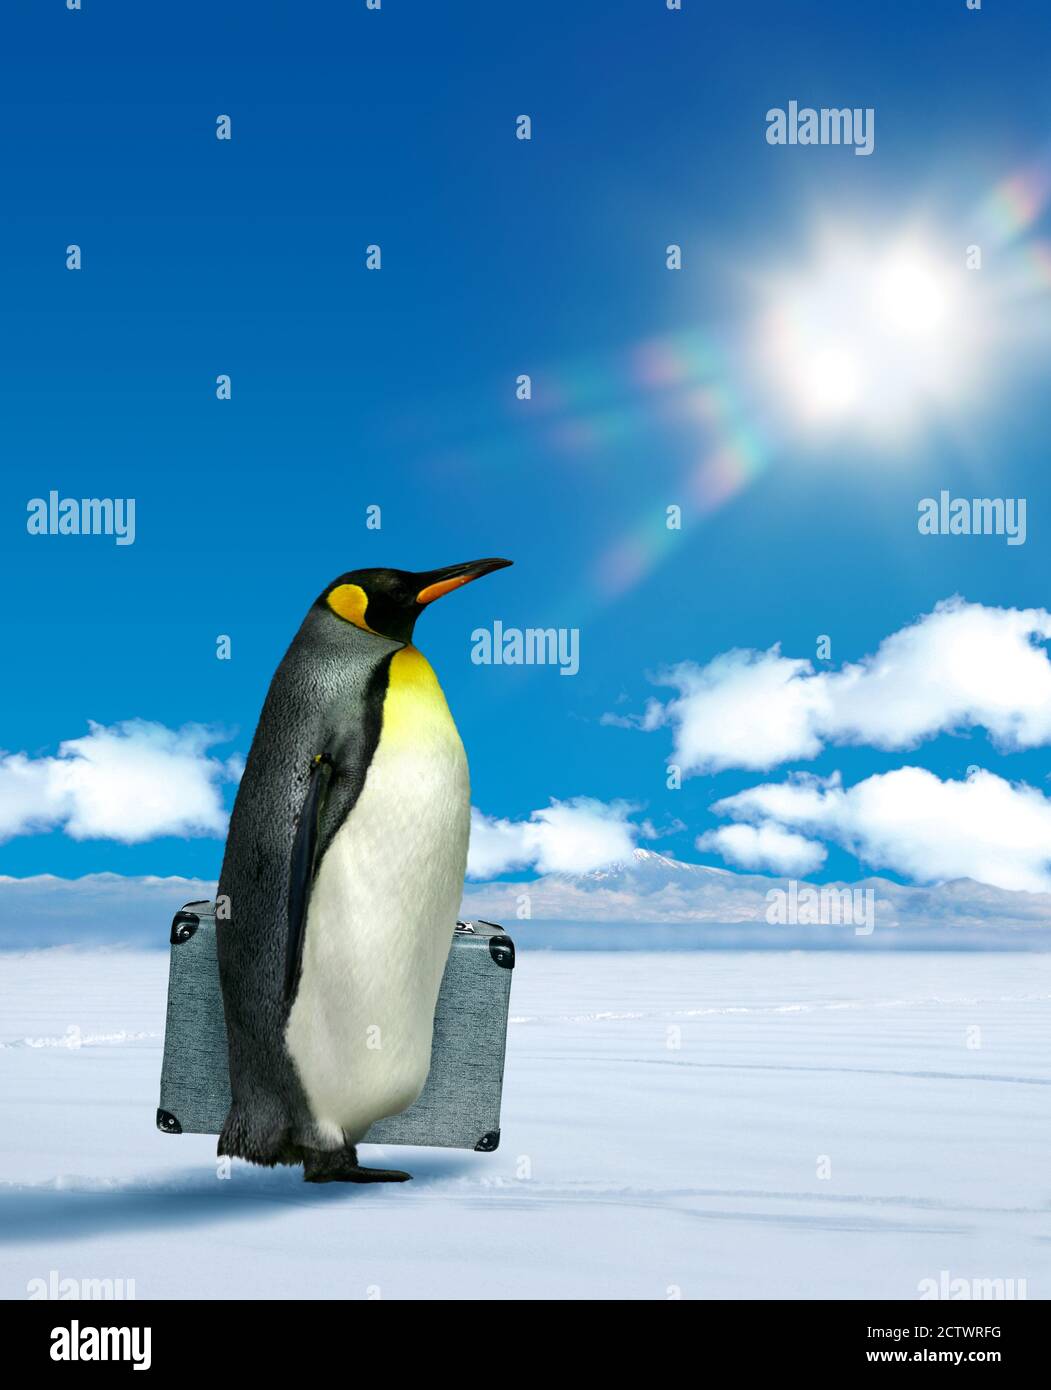 Antarctic penguin planning to move, climate change  warming concept Stock Photo